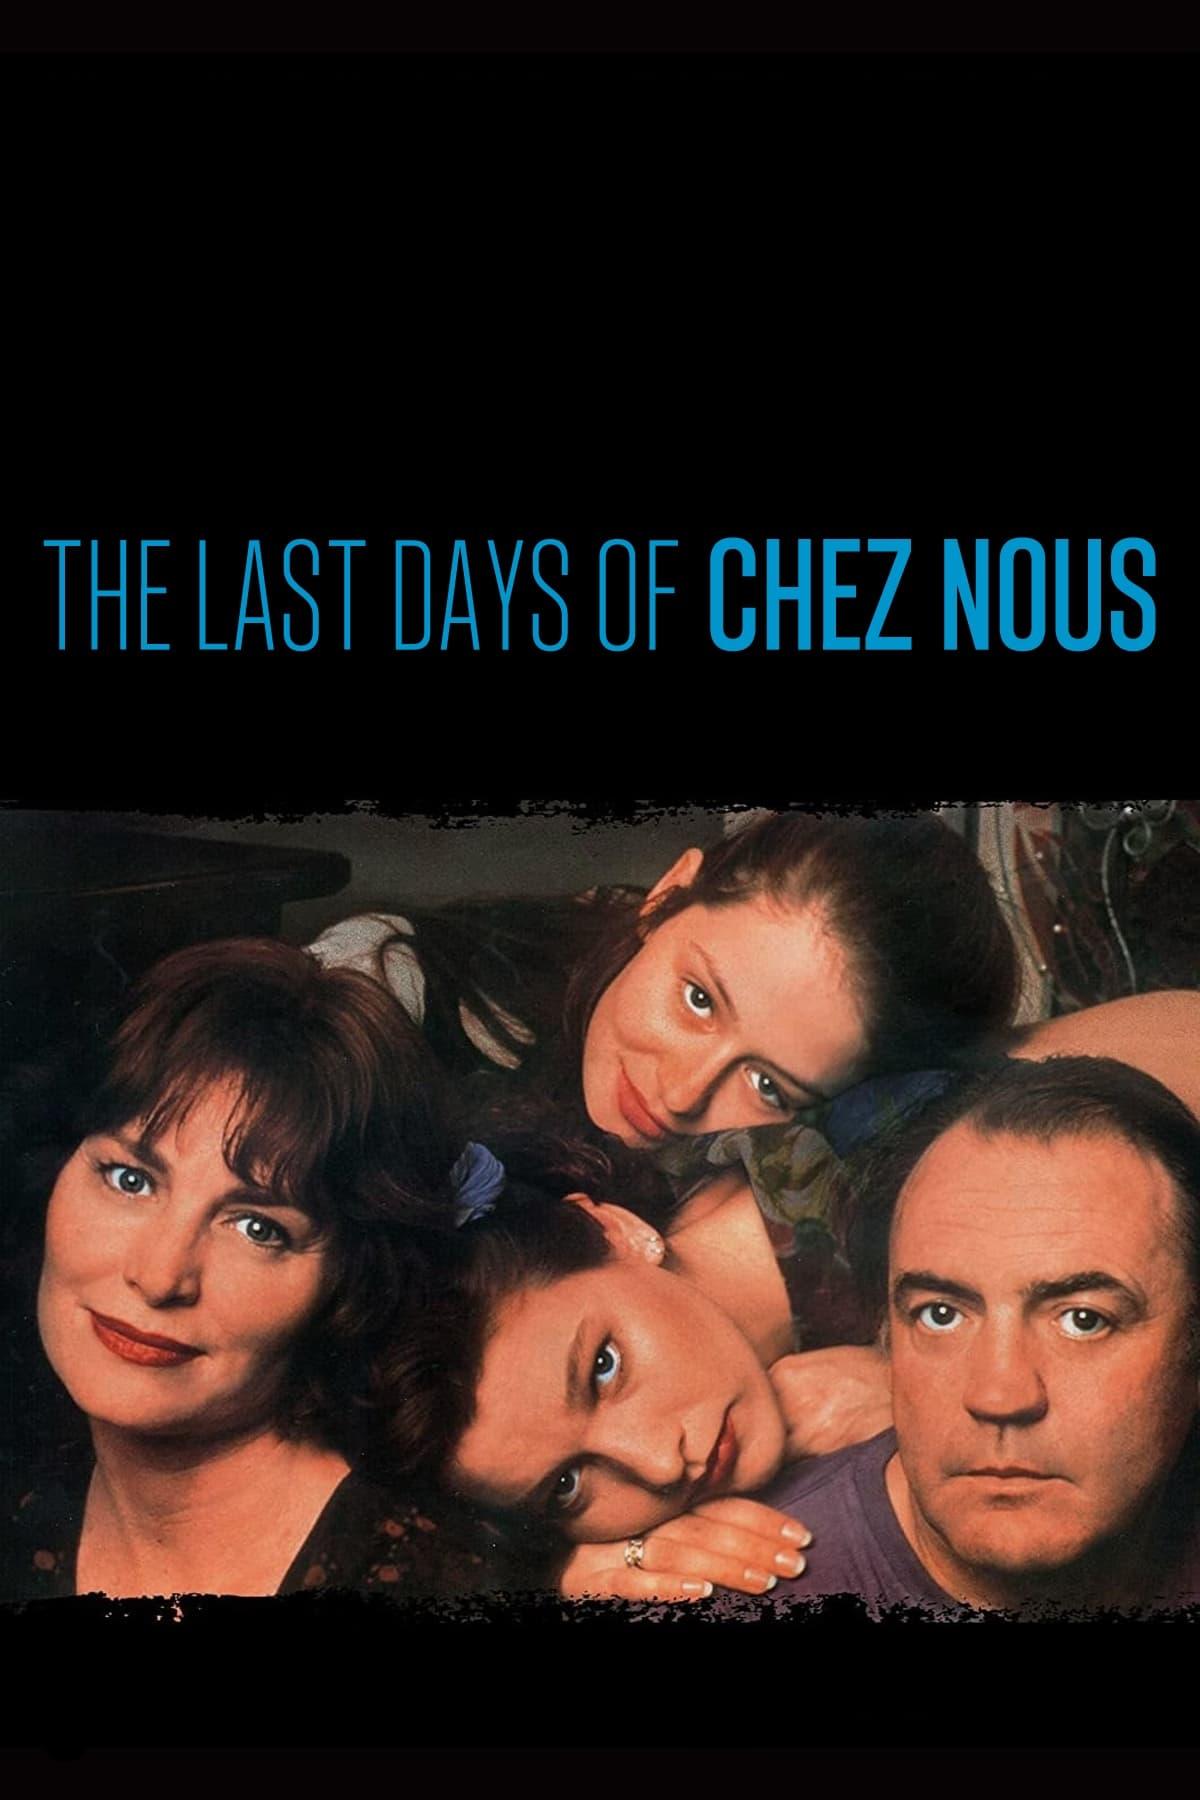 The Last Days of Chez Nous poster